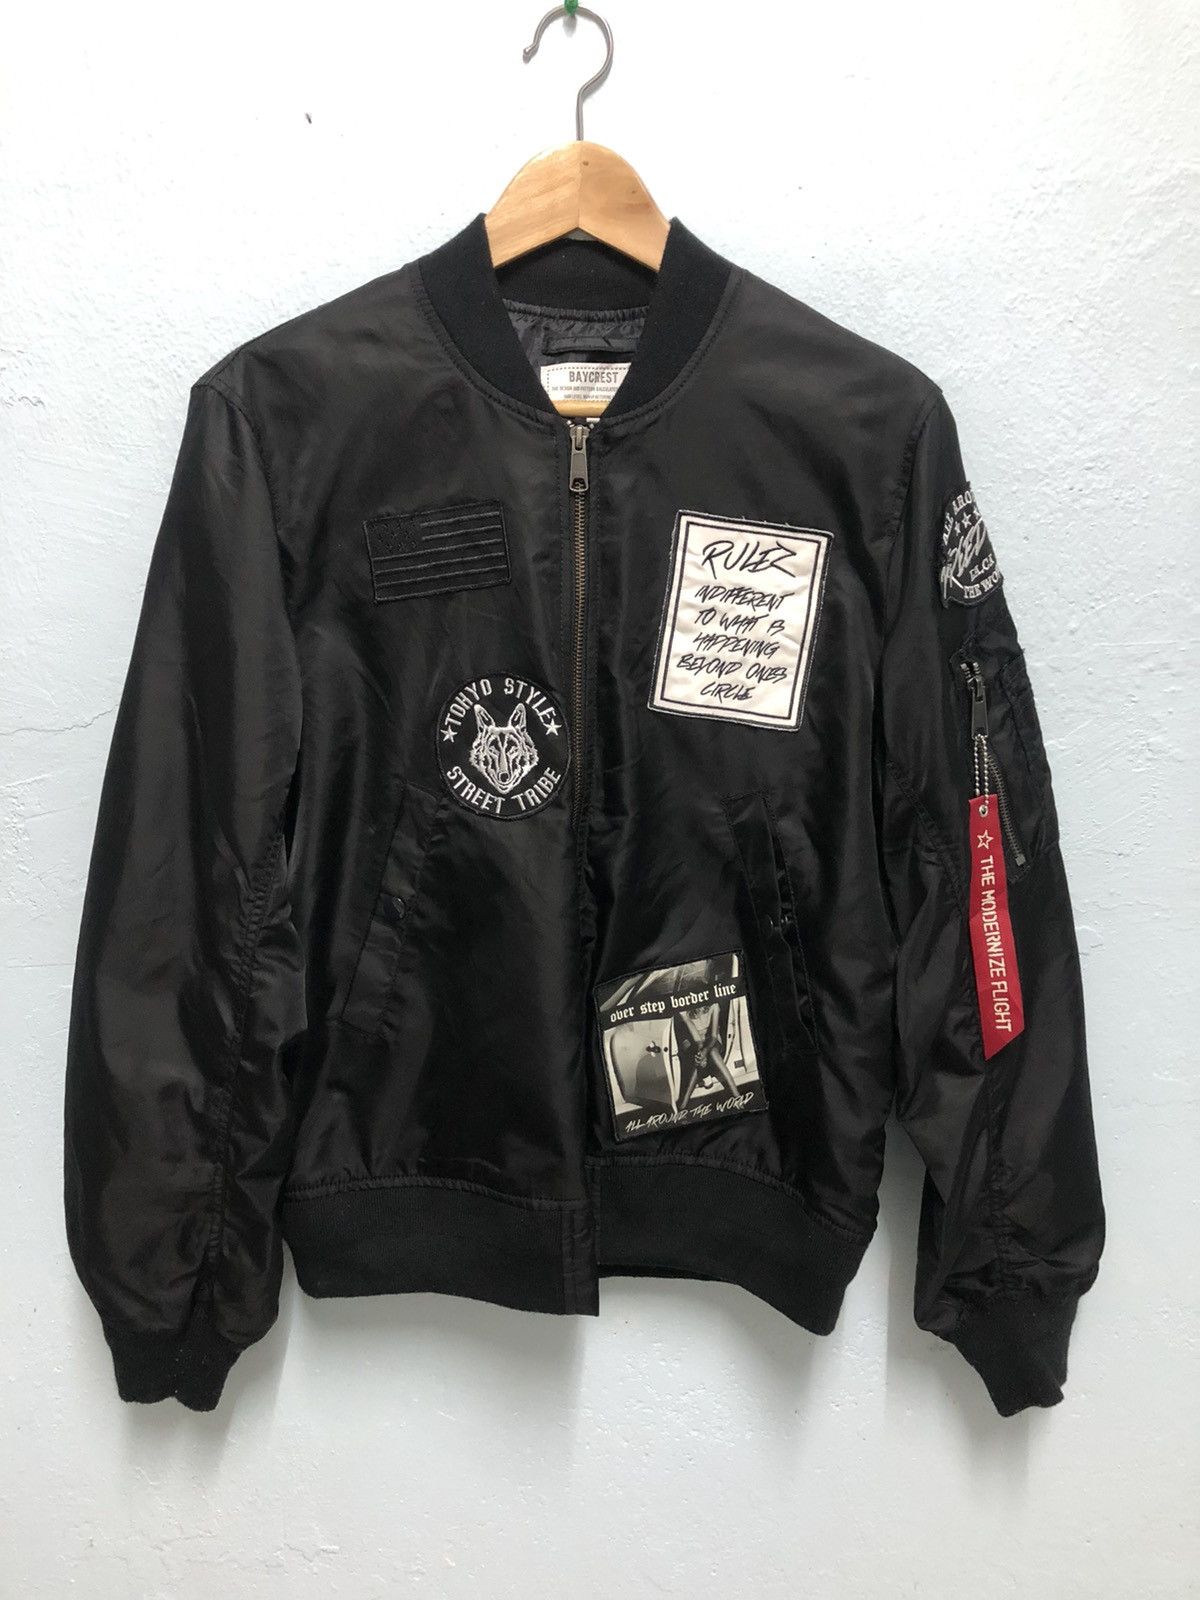 Japanese Brand BAYCREST PATCHES TOKYO STYLE BOMBER JACKET | Grailed